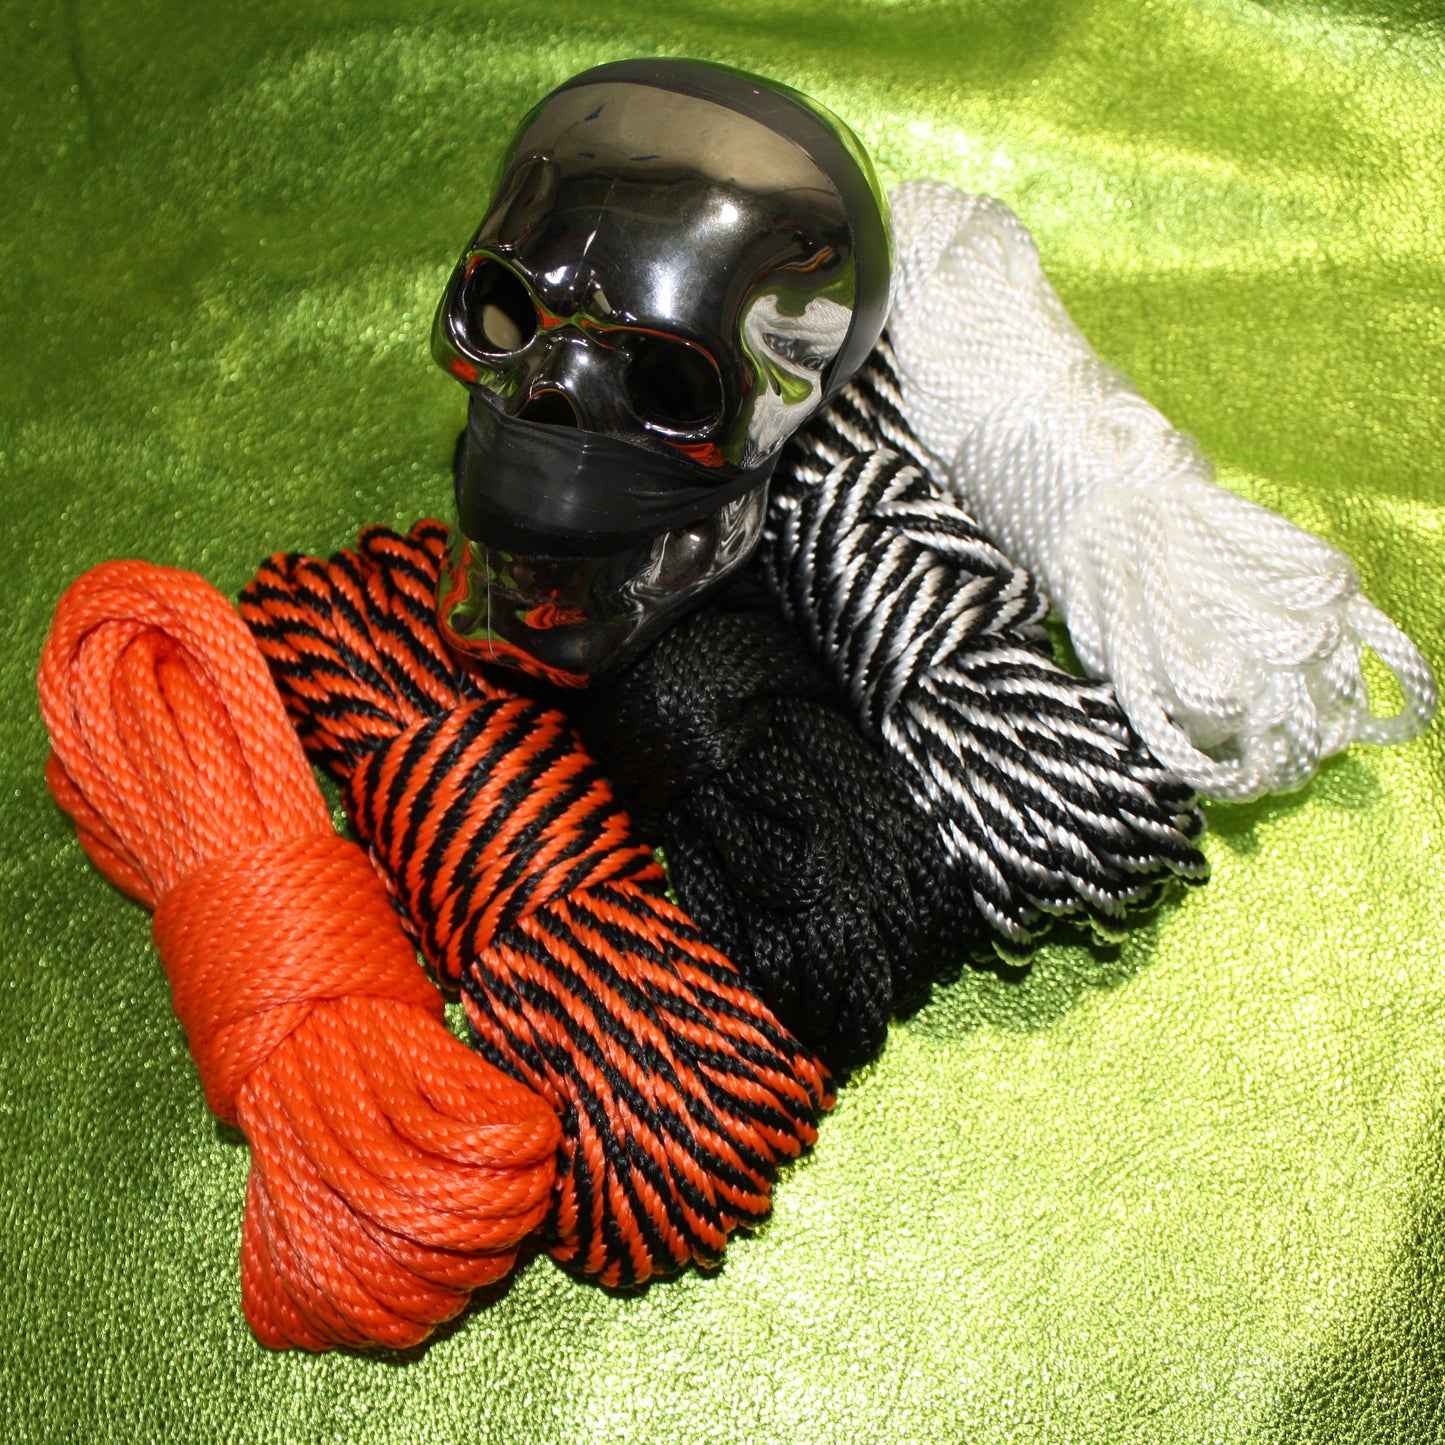 Halloween Spooky Rope! Black and Orange! Available all year!